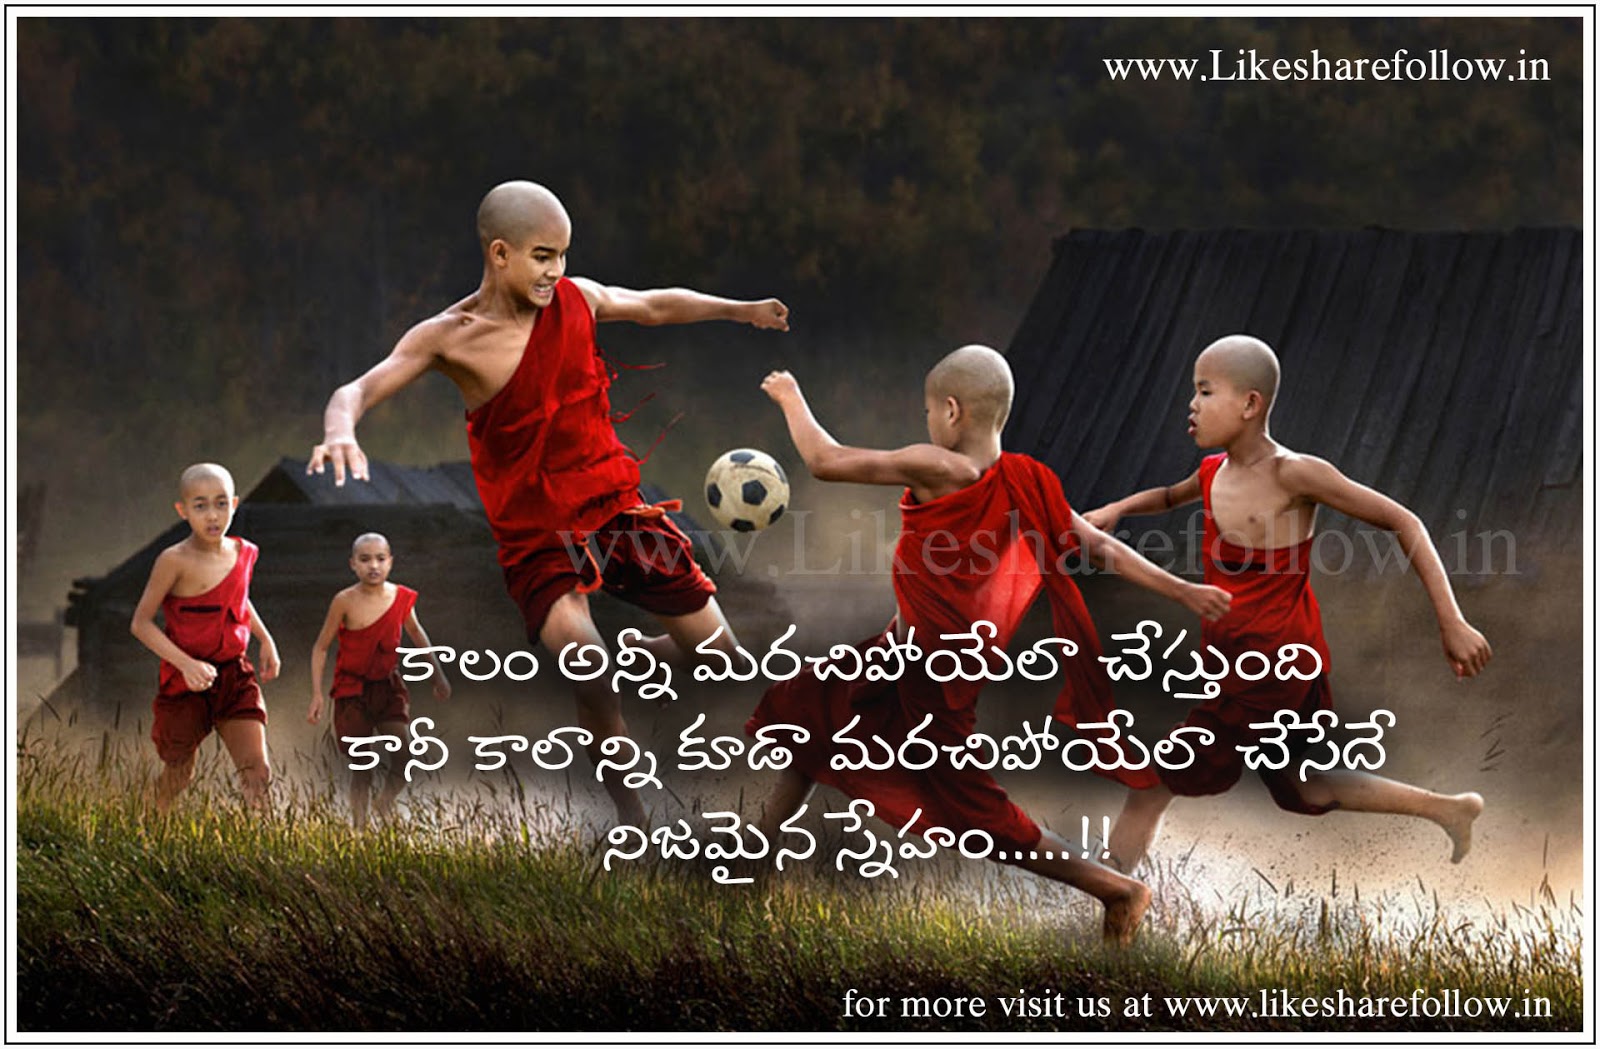 best friendship quotes messages in telugu | Like Share Follow